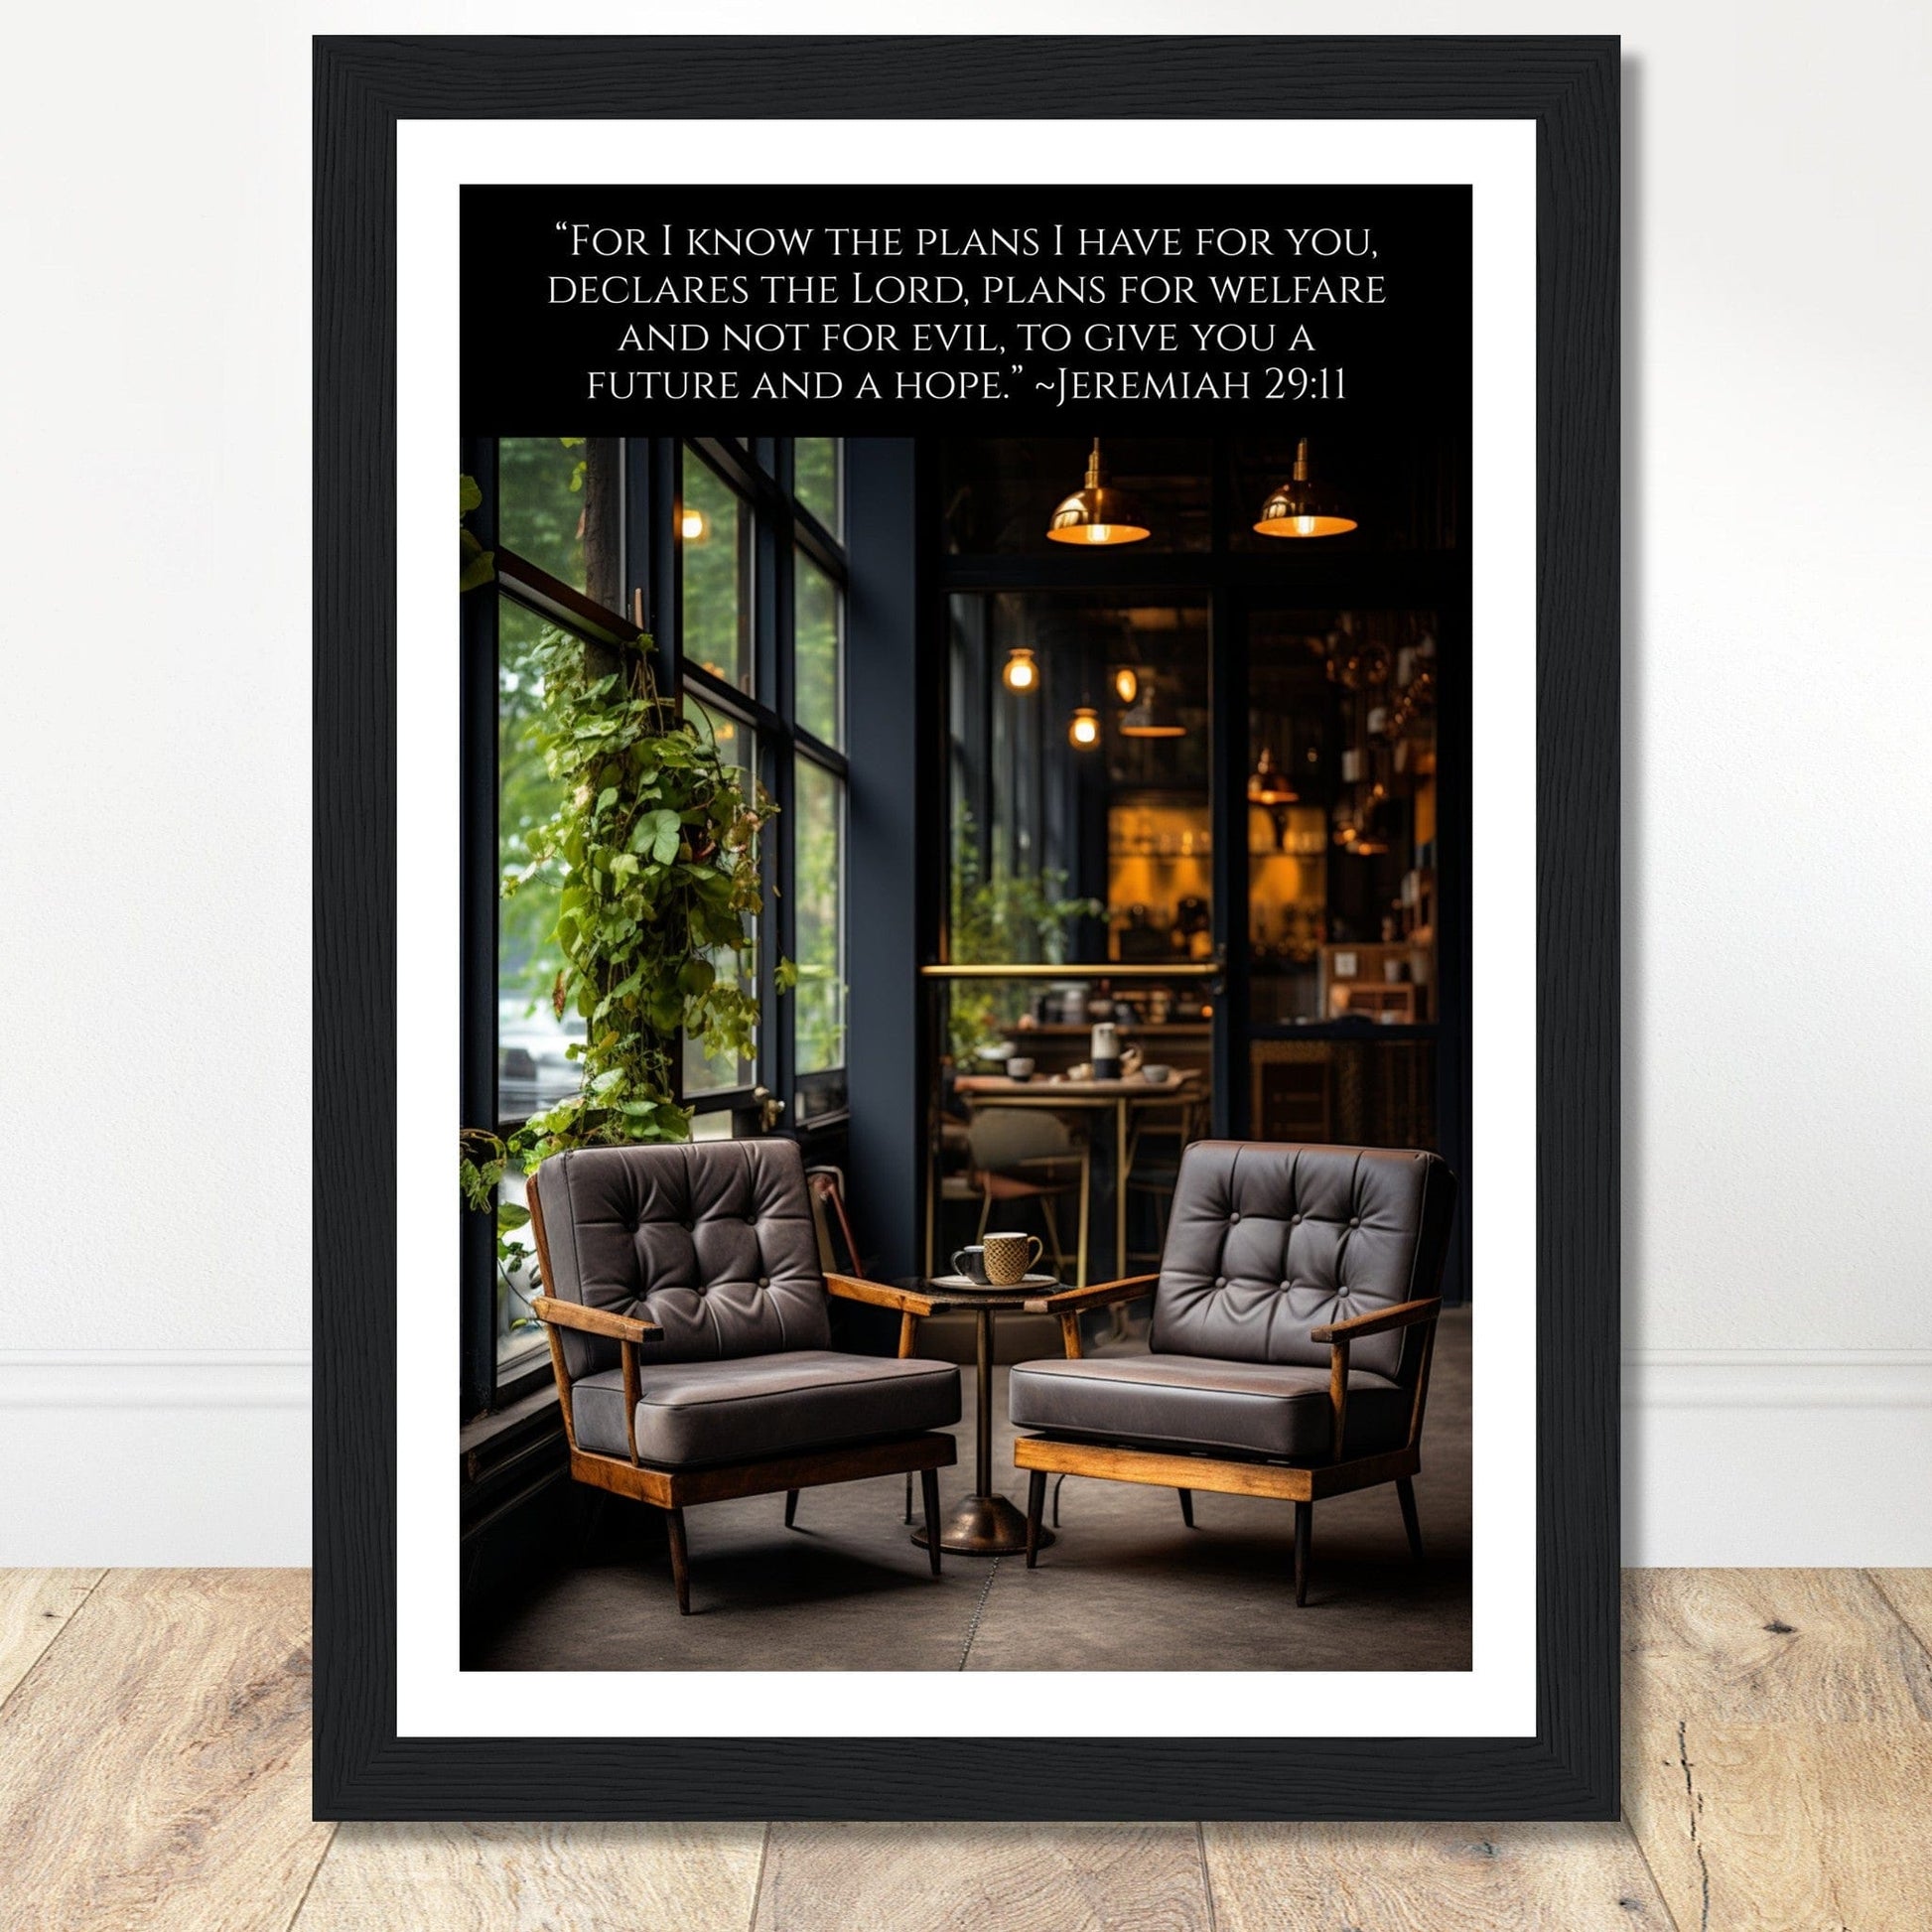 Coffee With My Father Print Material A4 21x29.7 cm / 8x12″ / Premium Matte Paper Wooden Framed Poster / Black frame Framed Template